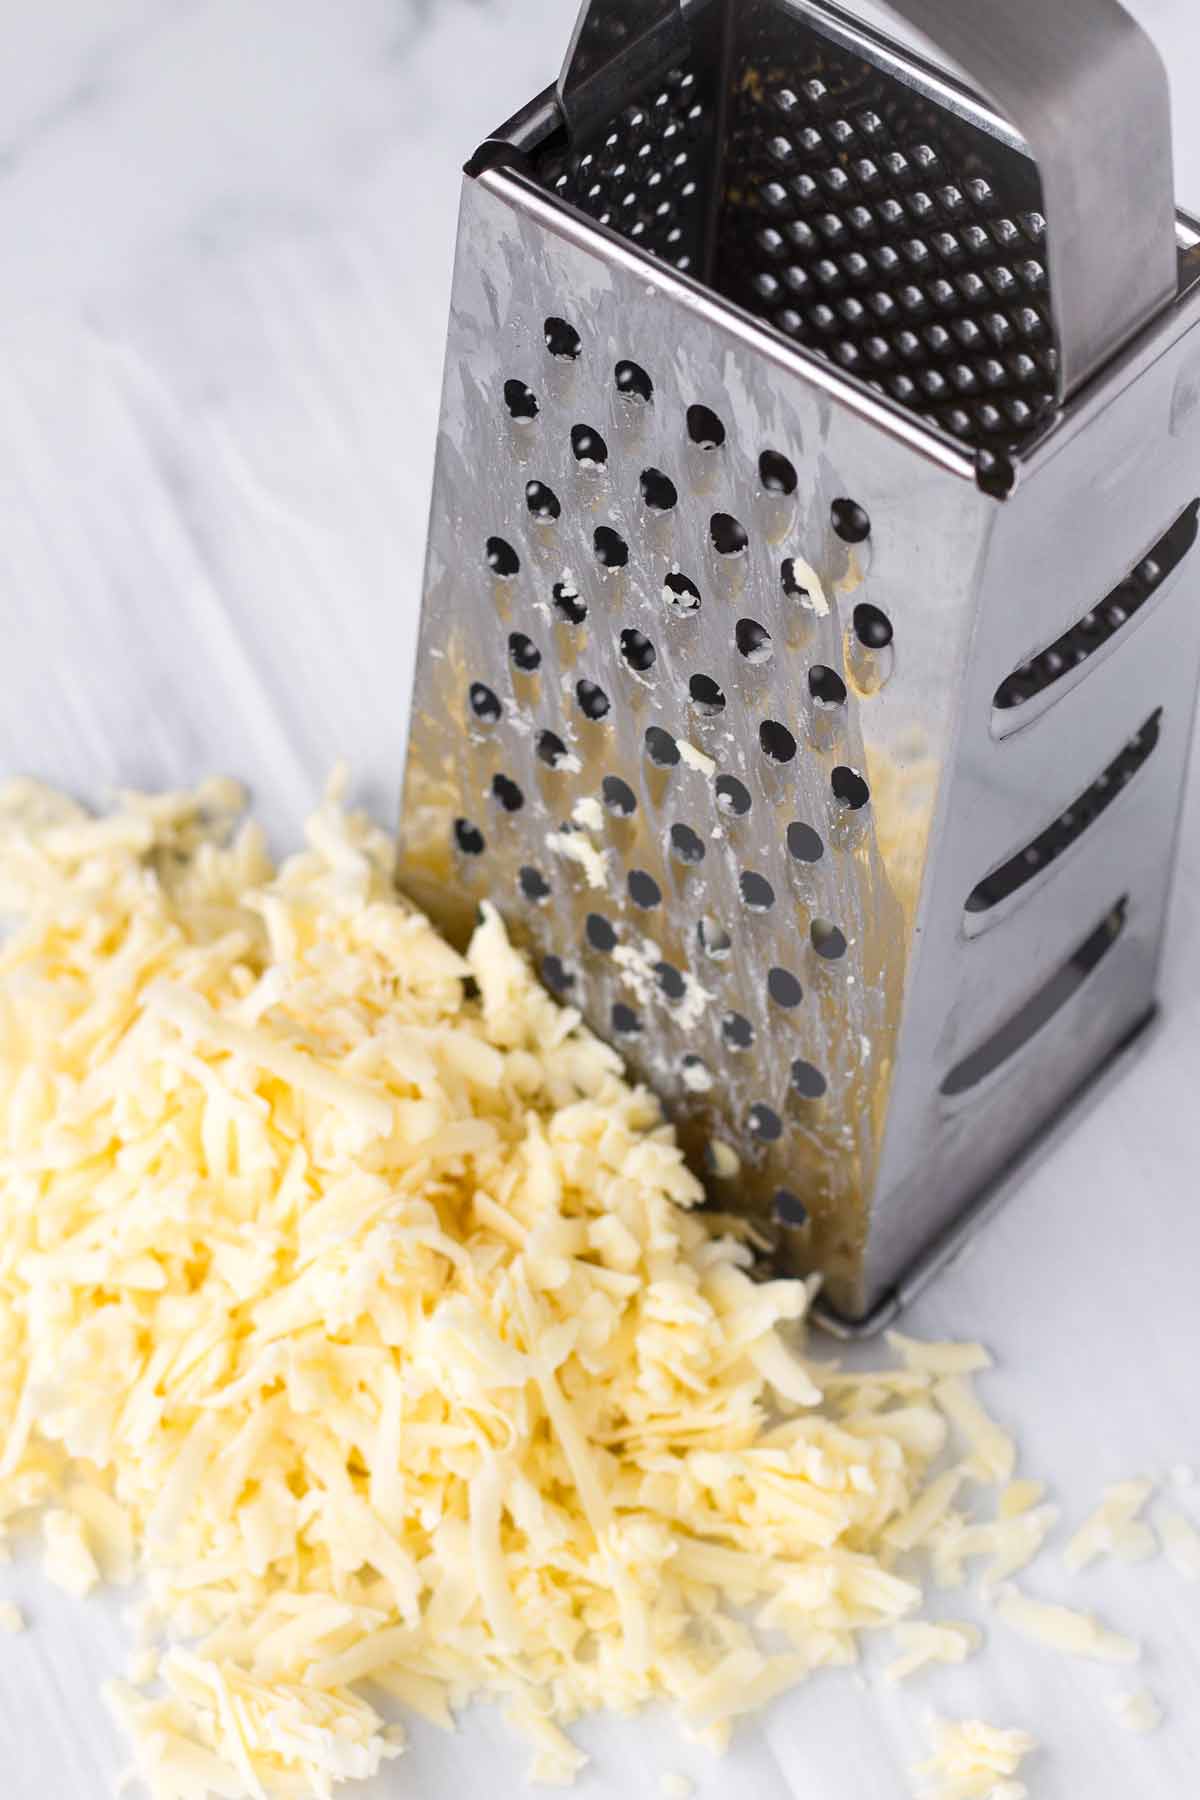 grated cheese next to a box grater